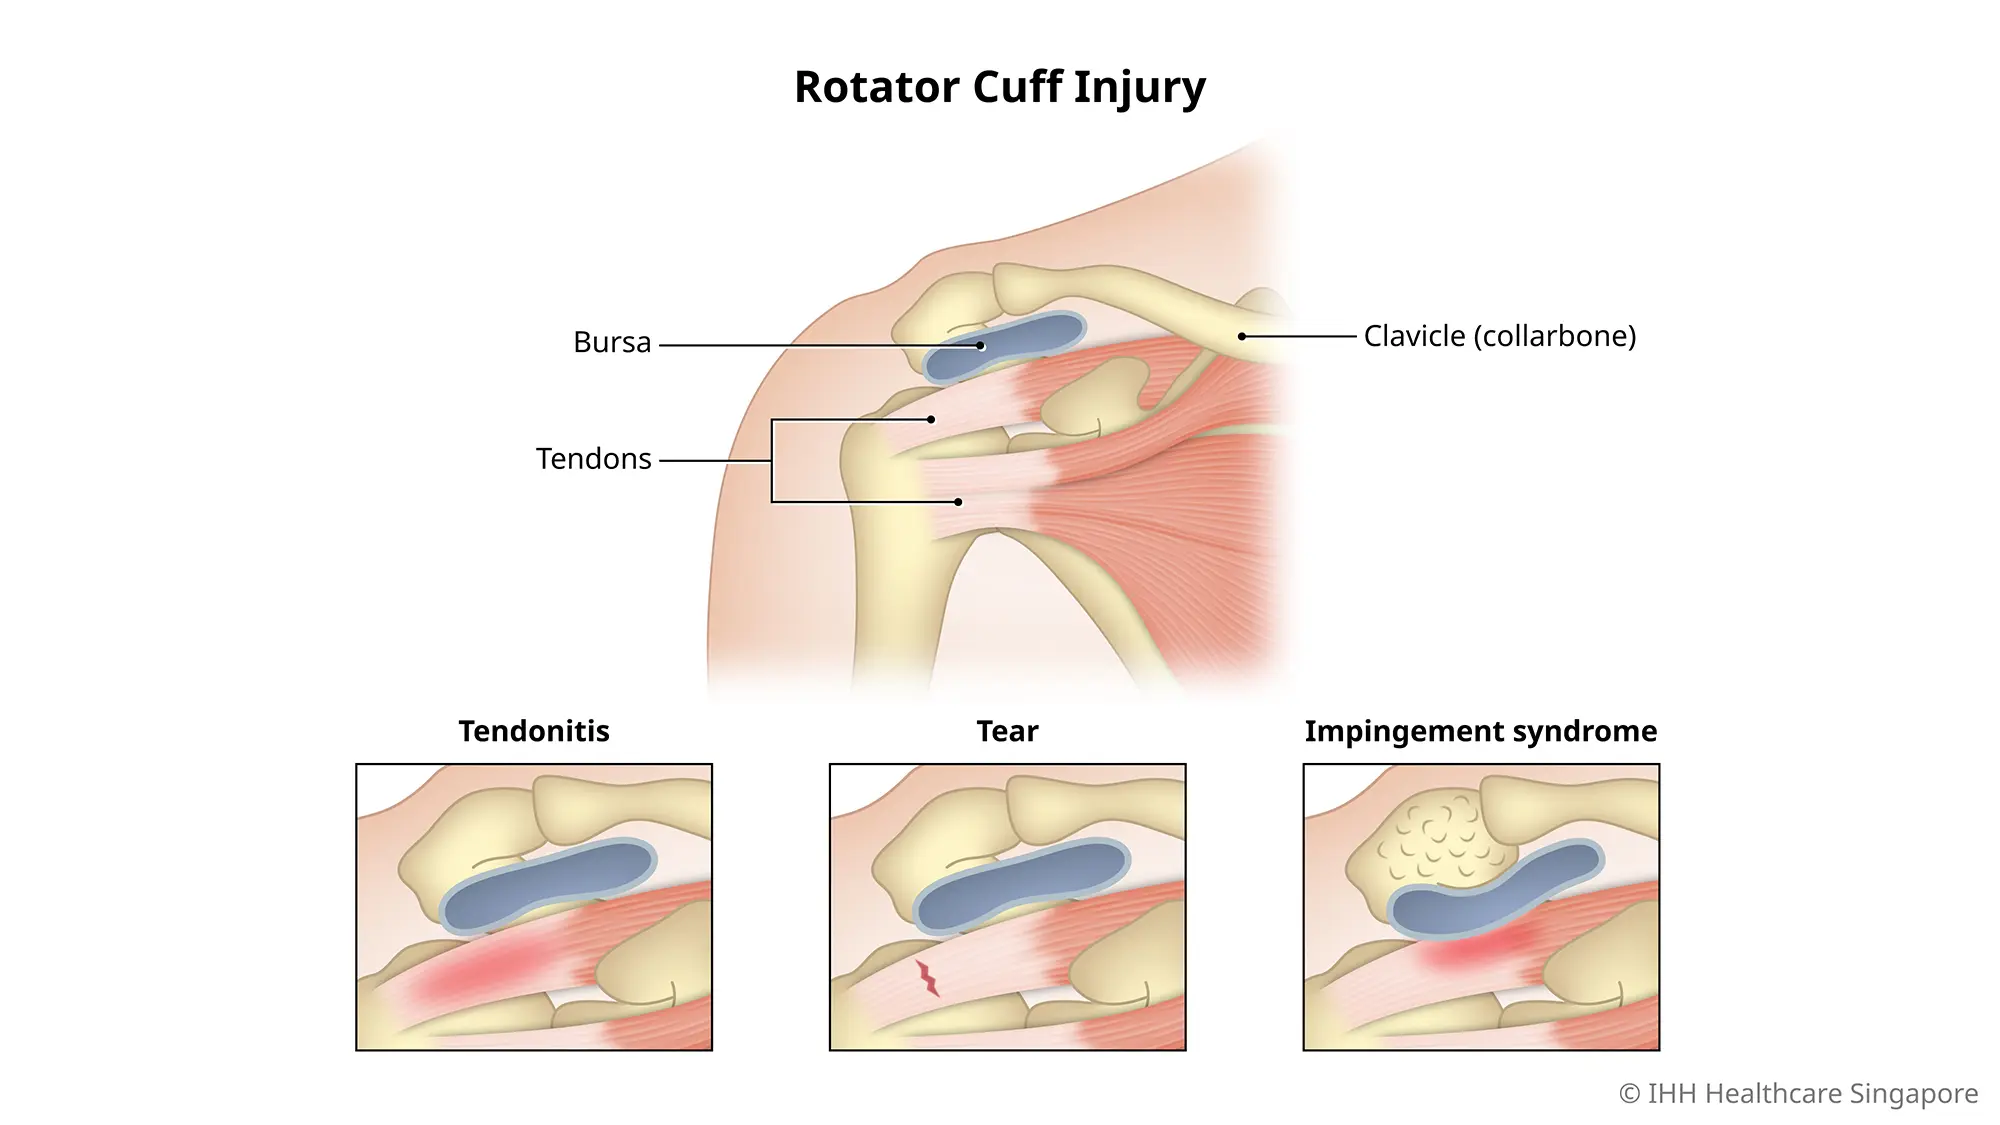 Rotator cuff injury is the inflammation and swelling of muscles and tendons at the shoulder joint.